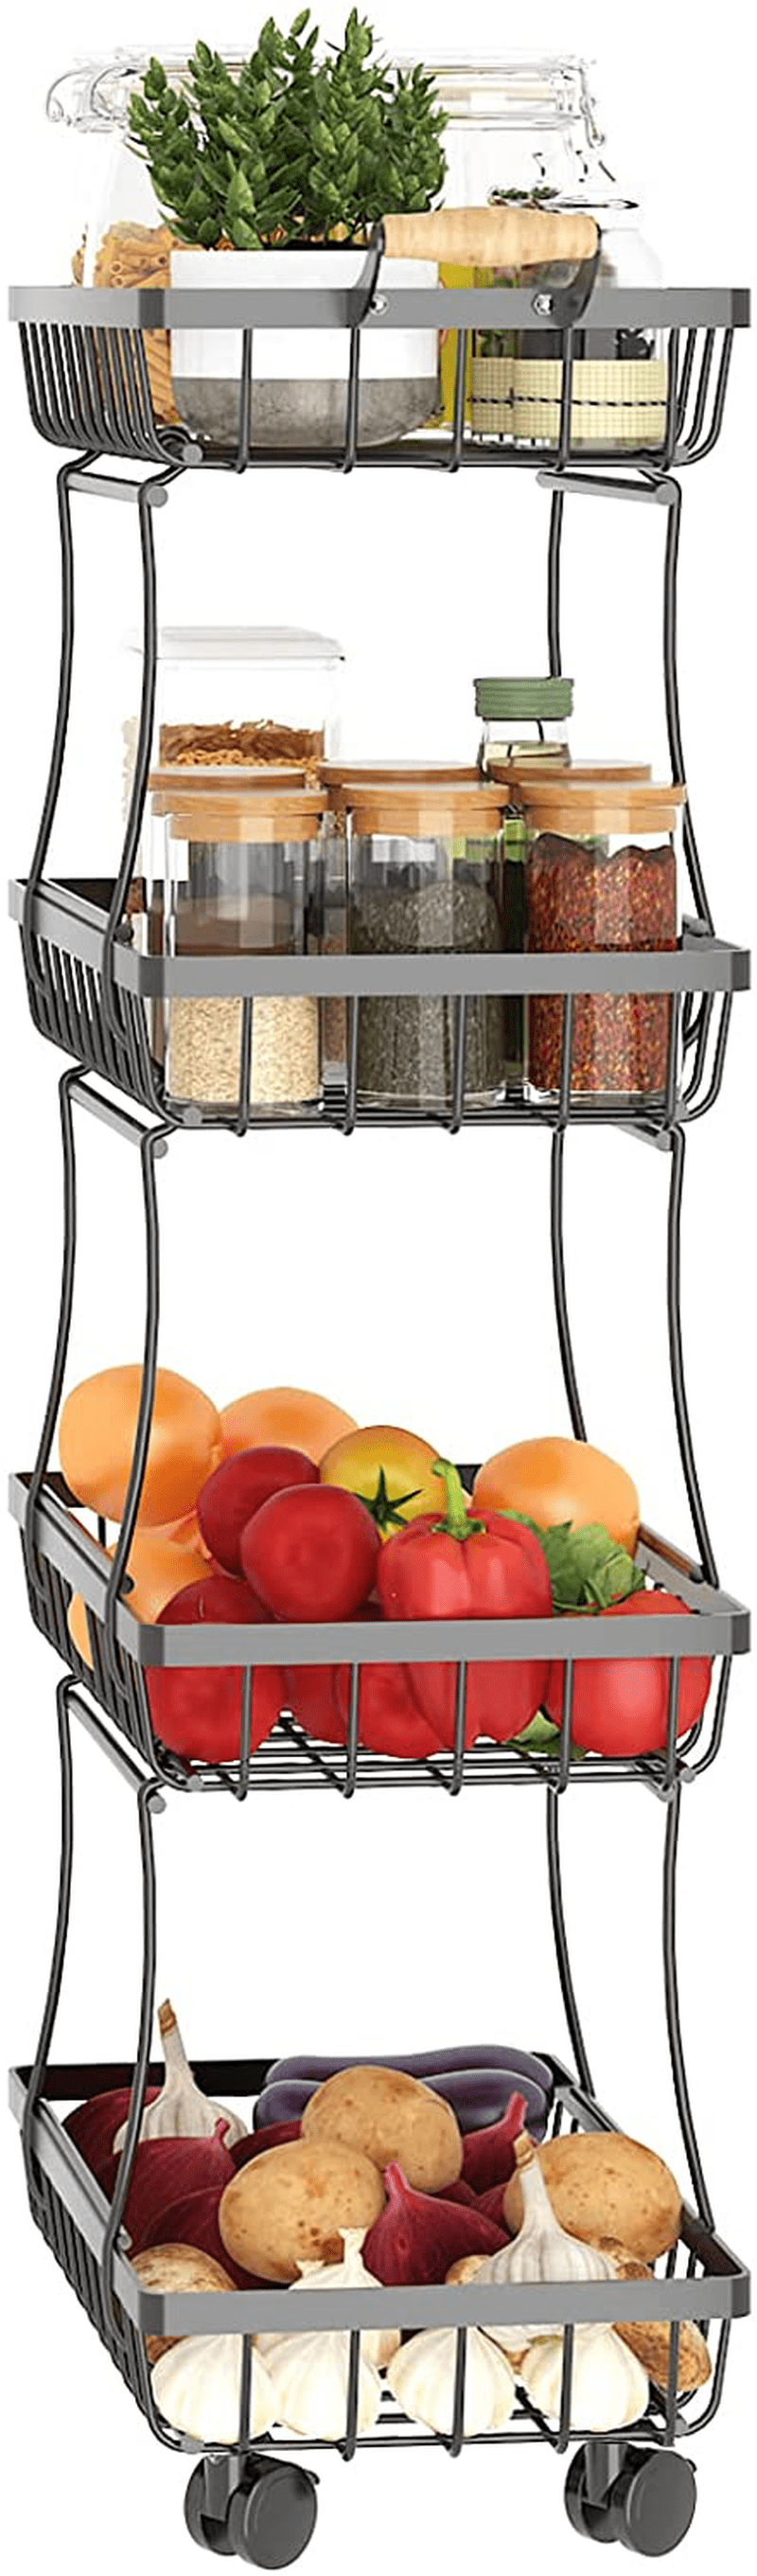 CHLORYARD Fruit Basket for Kitchen, Detachable 5-Tier Stackable Baskets with Tabletop, Wire Organizer Basket with Wheels, Kitchen Storage Cart for Onions and Potatoes, Produce Storage Bins for Pantry Home & Garden > Kitchen & Dining > Food Storage CHLORYARD 4 layer basket  